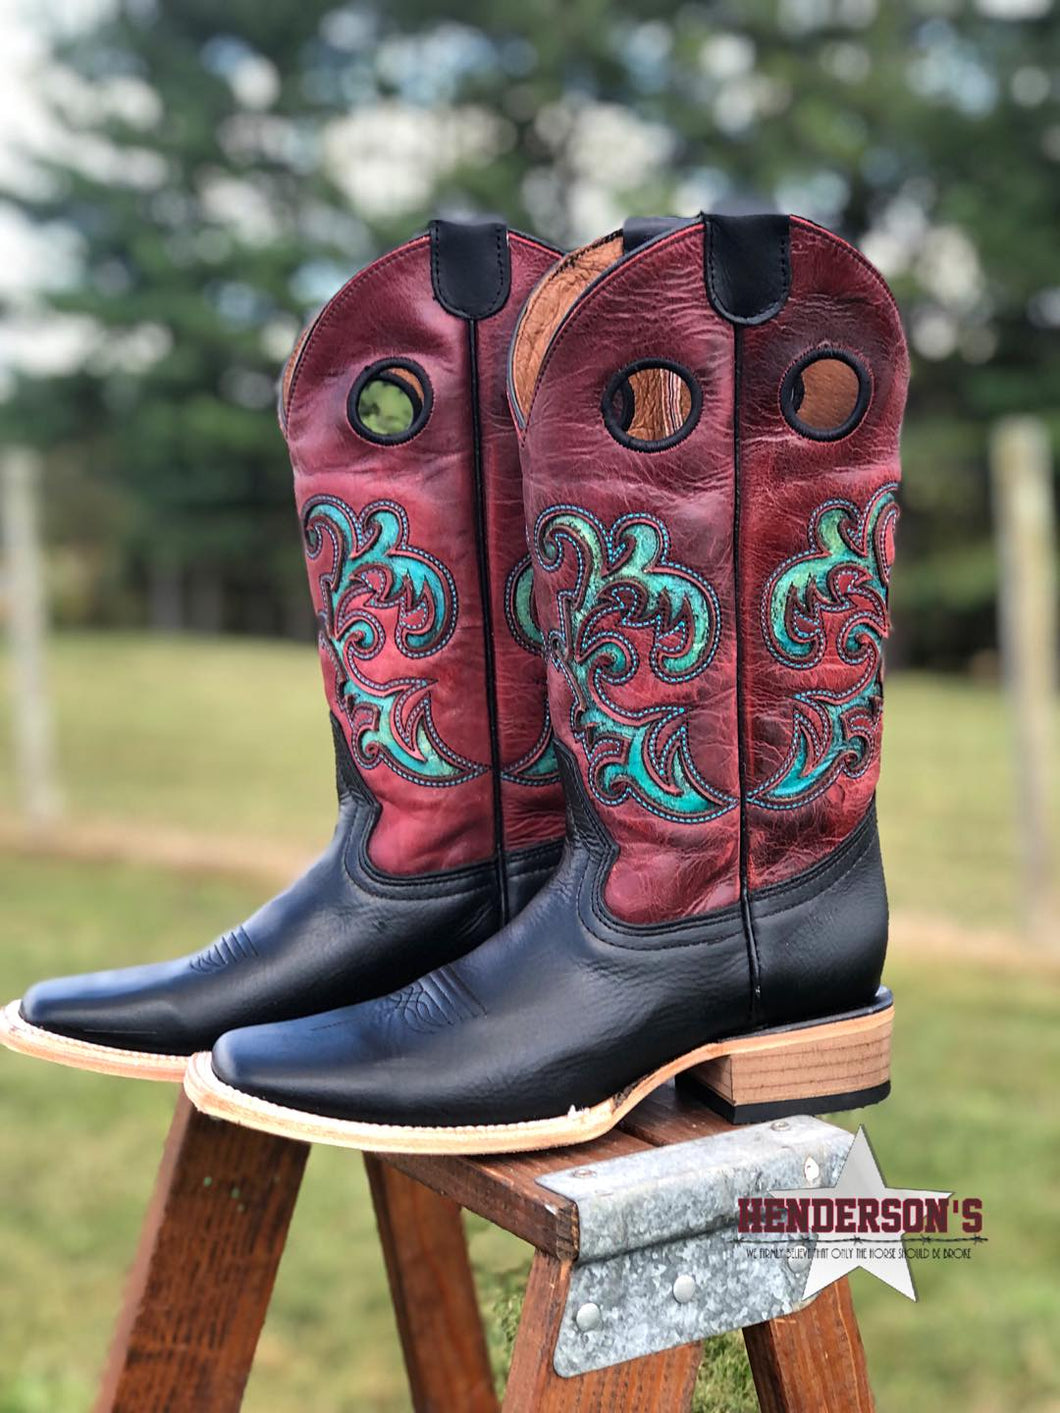 Black & Red Embroidered Boots - Henderson's Western Store